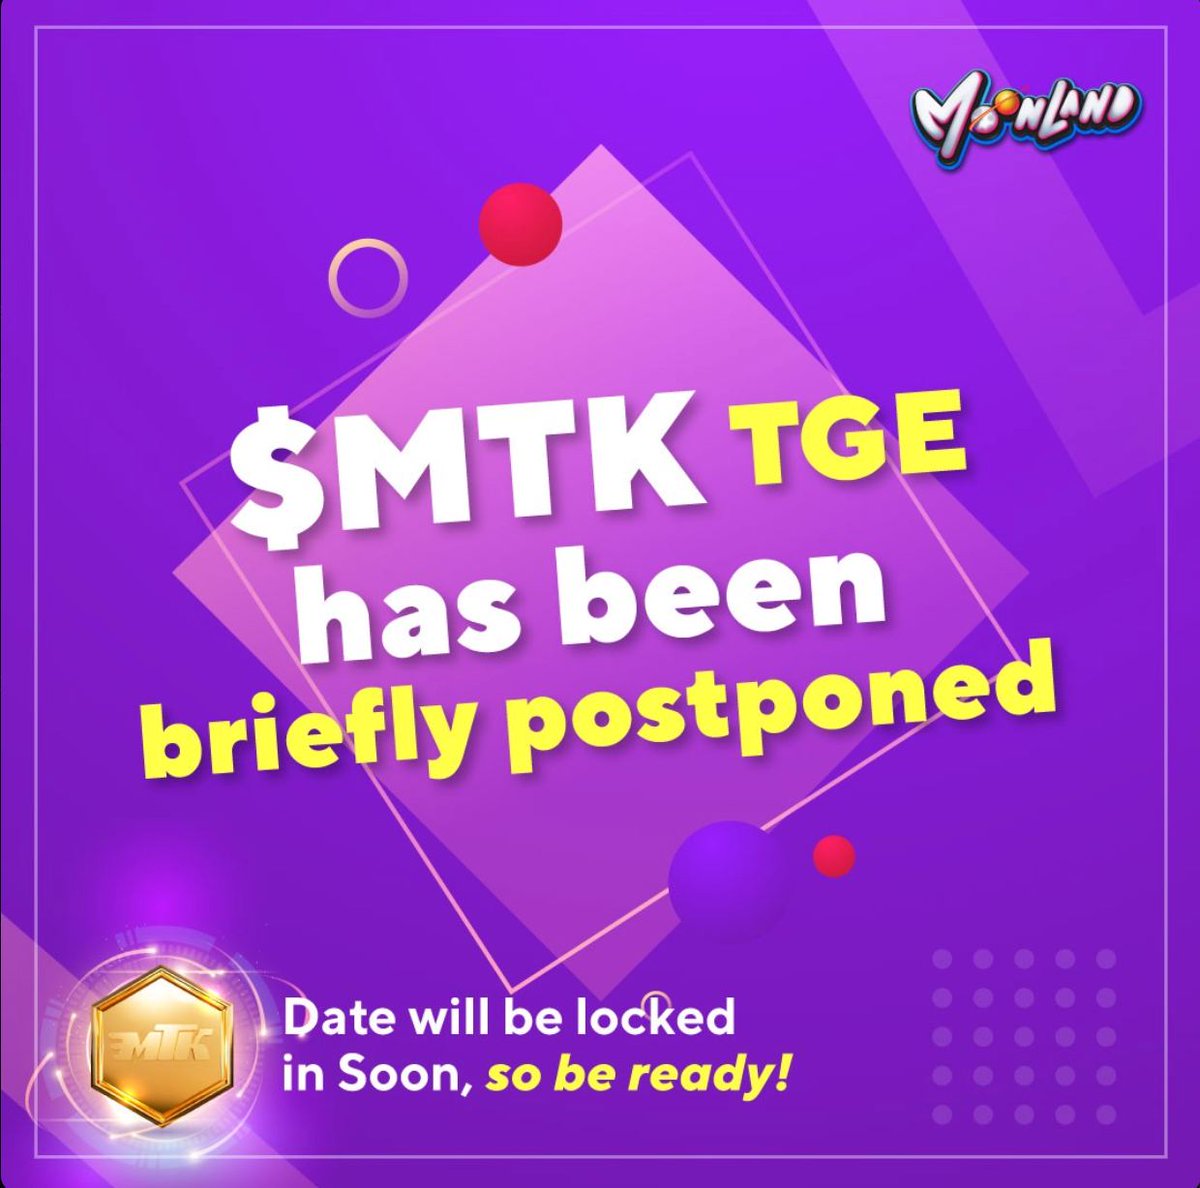 🚨Breaking News🚨

For Technical Difficulties, the MTK TGE will be postponed. Our team remains fully committed and diligent to ensure a smooth and secure launch. A New TGE Date will be locked in soon, so be ready! 🔥 #Moonland #Metaverse #MTK #TGE #Cryptogaming #Crypto